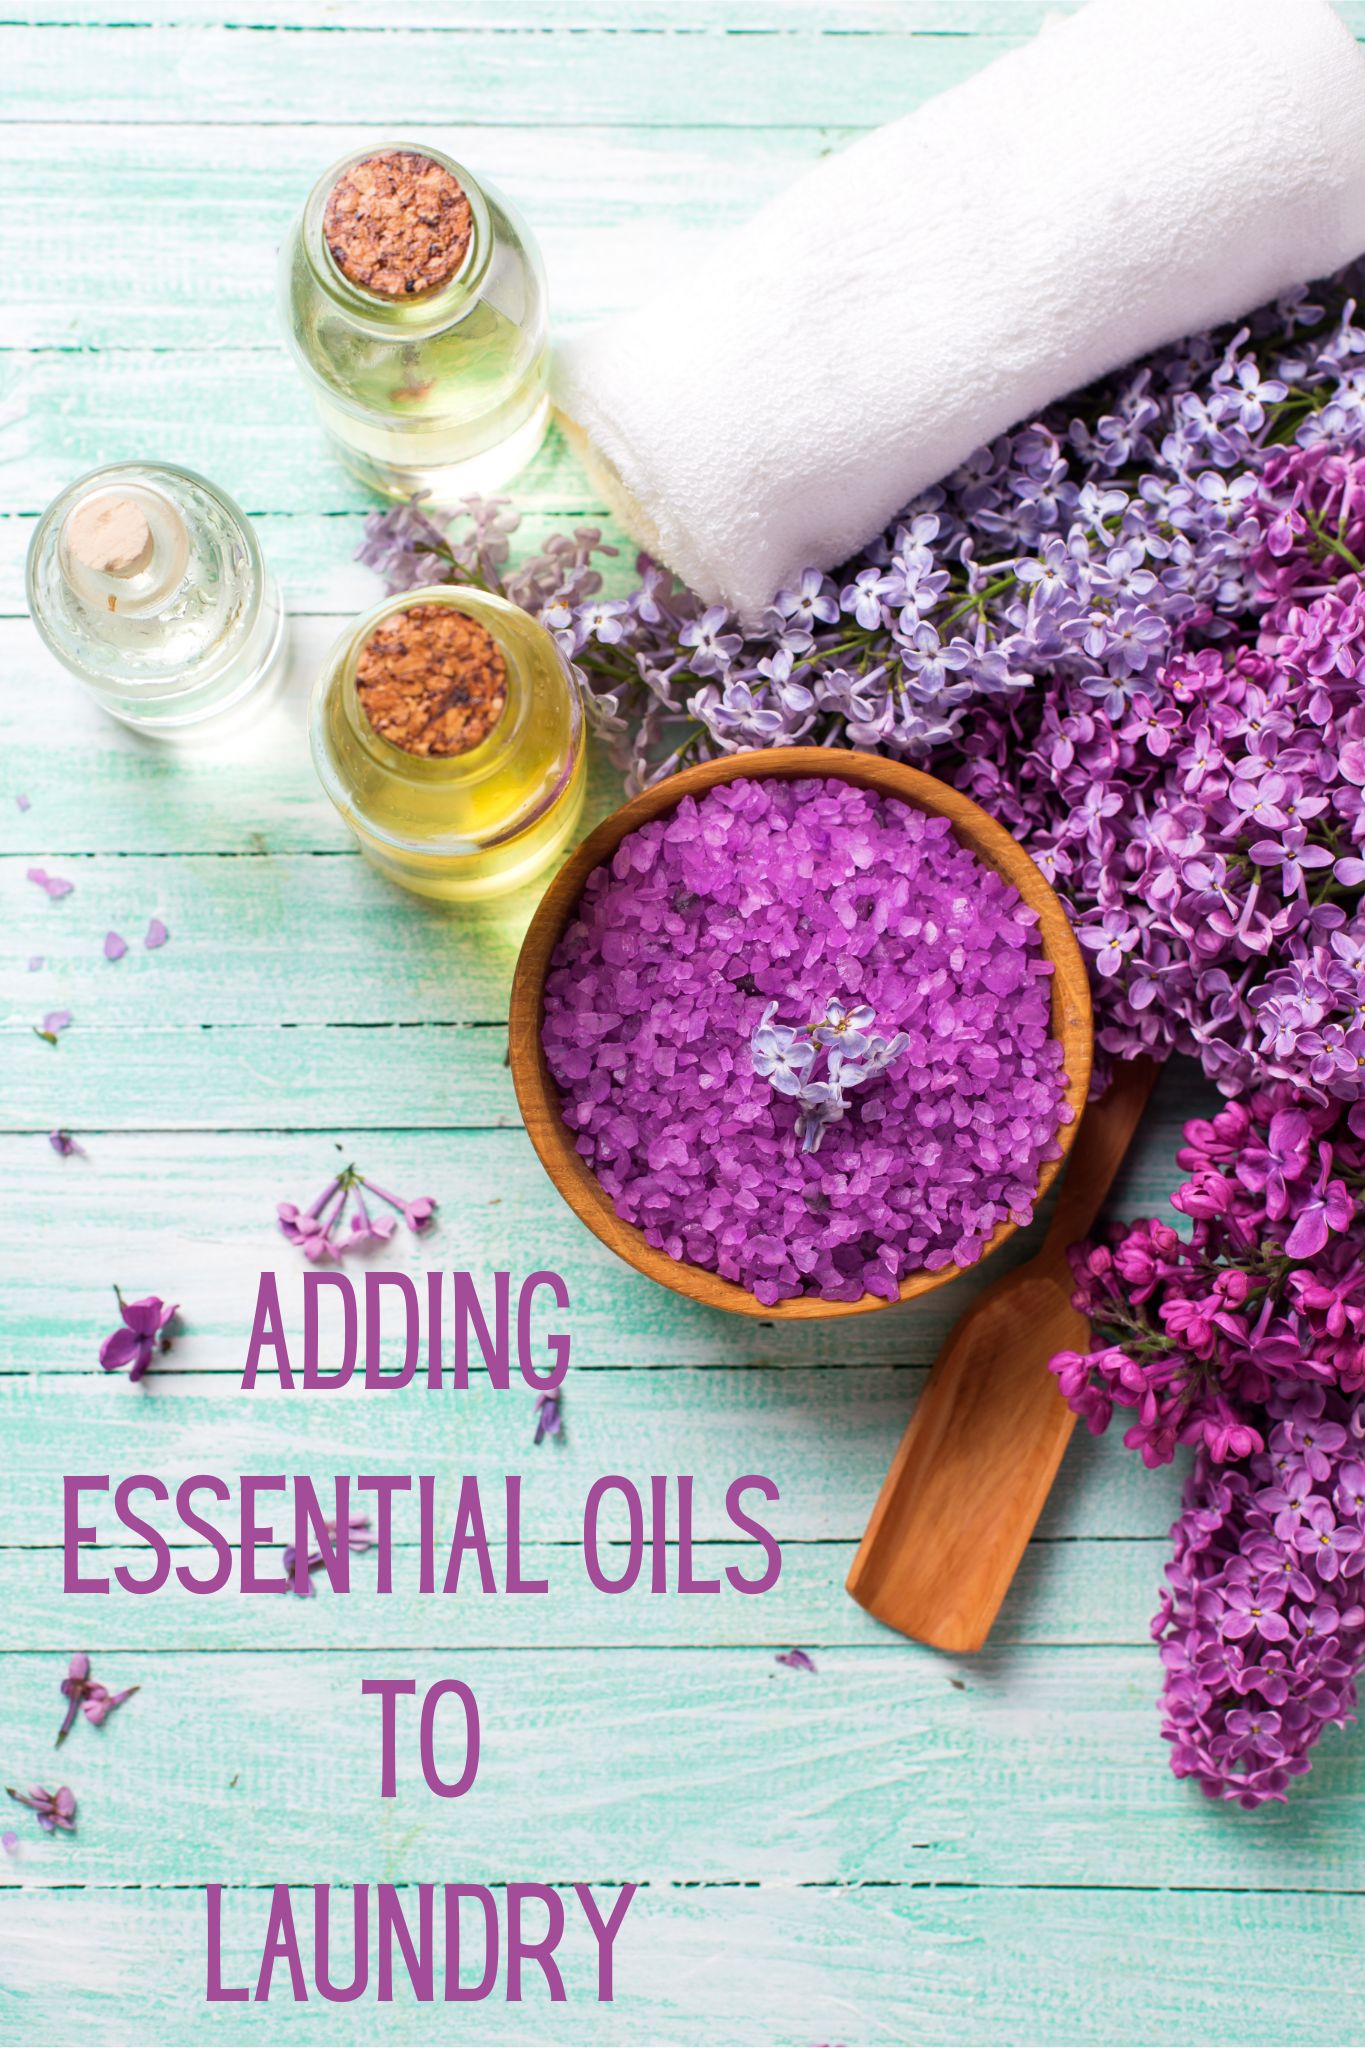 Adding Essential Oils to Laundry